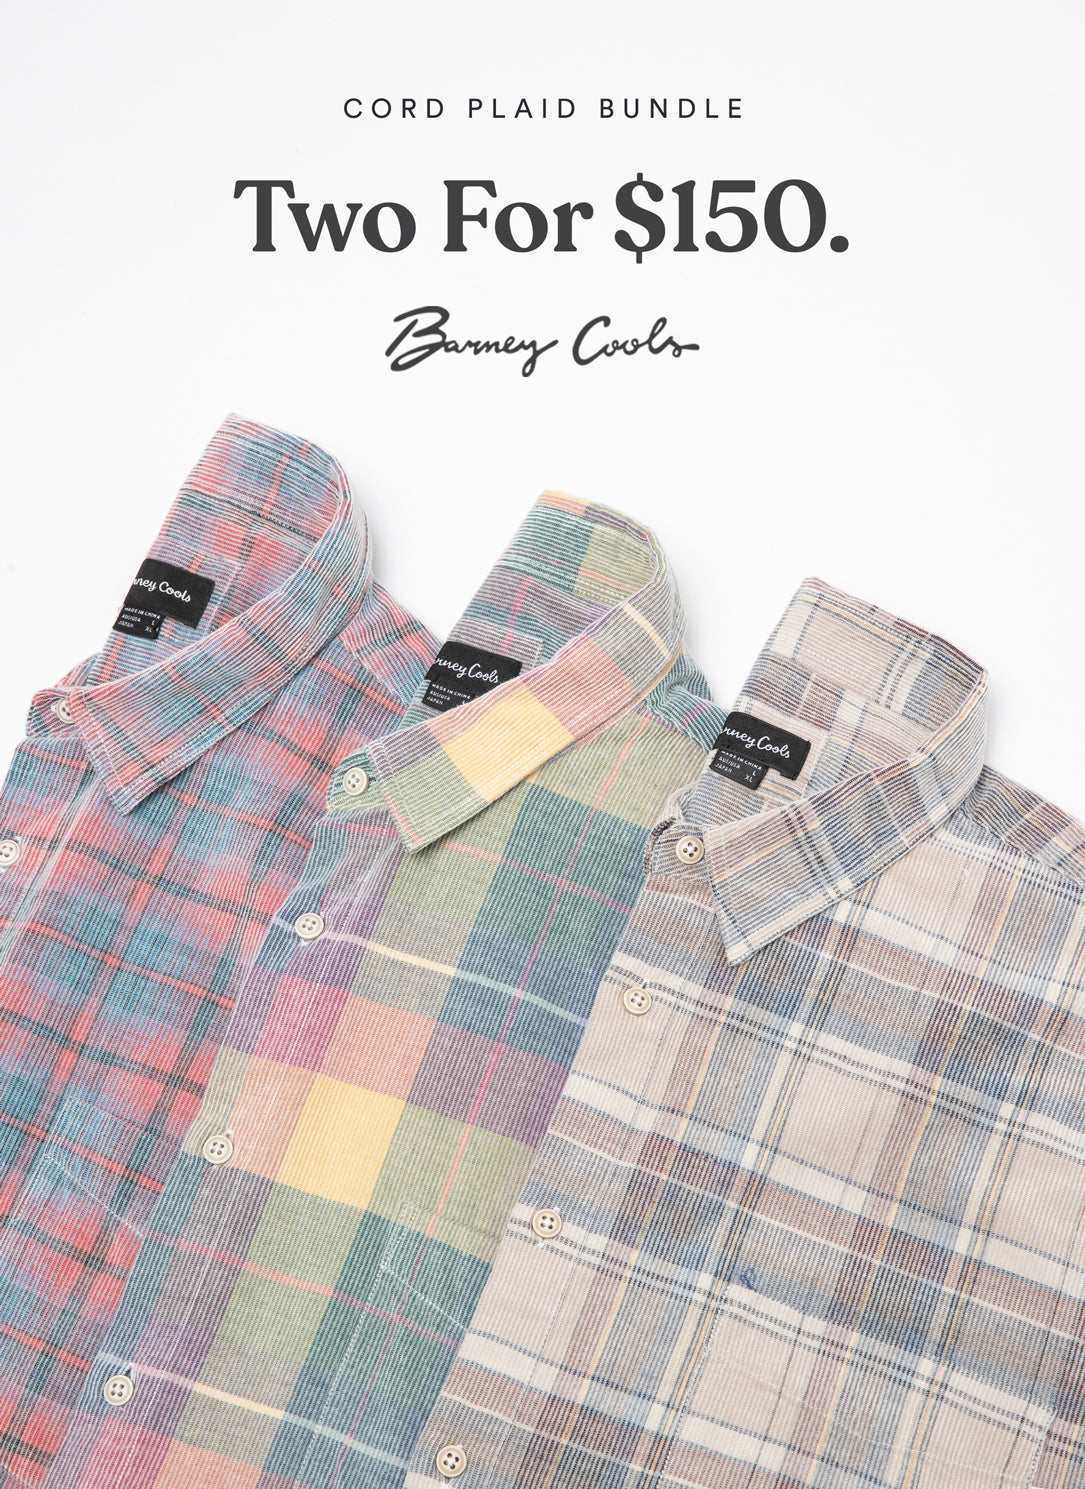 2 For $150 Cord Plaid